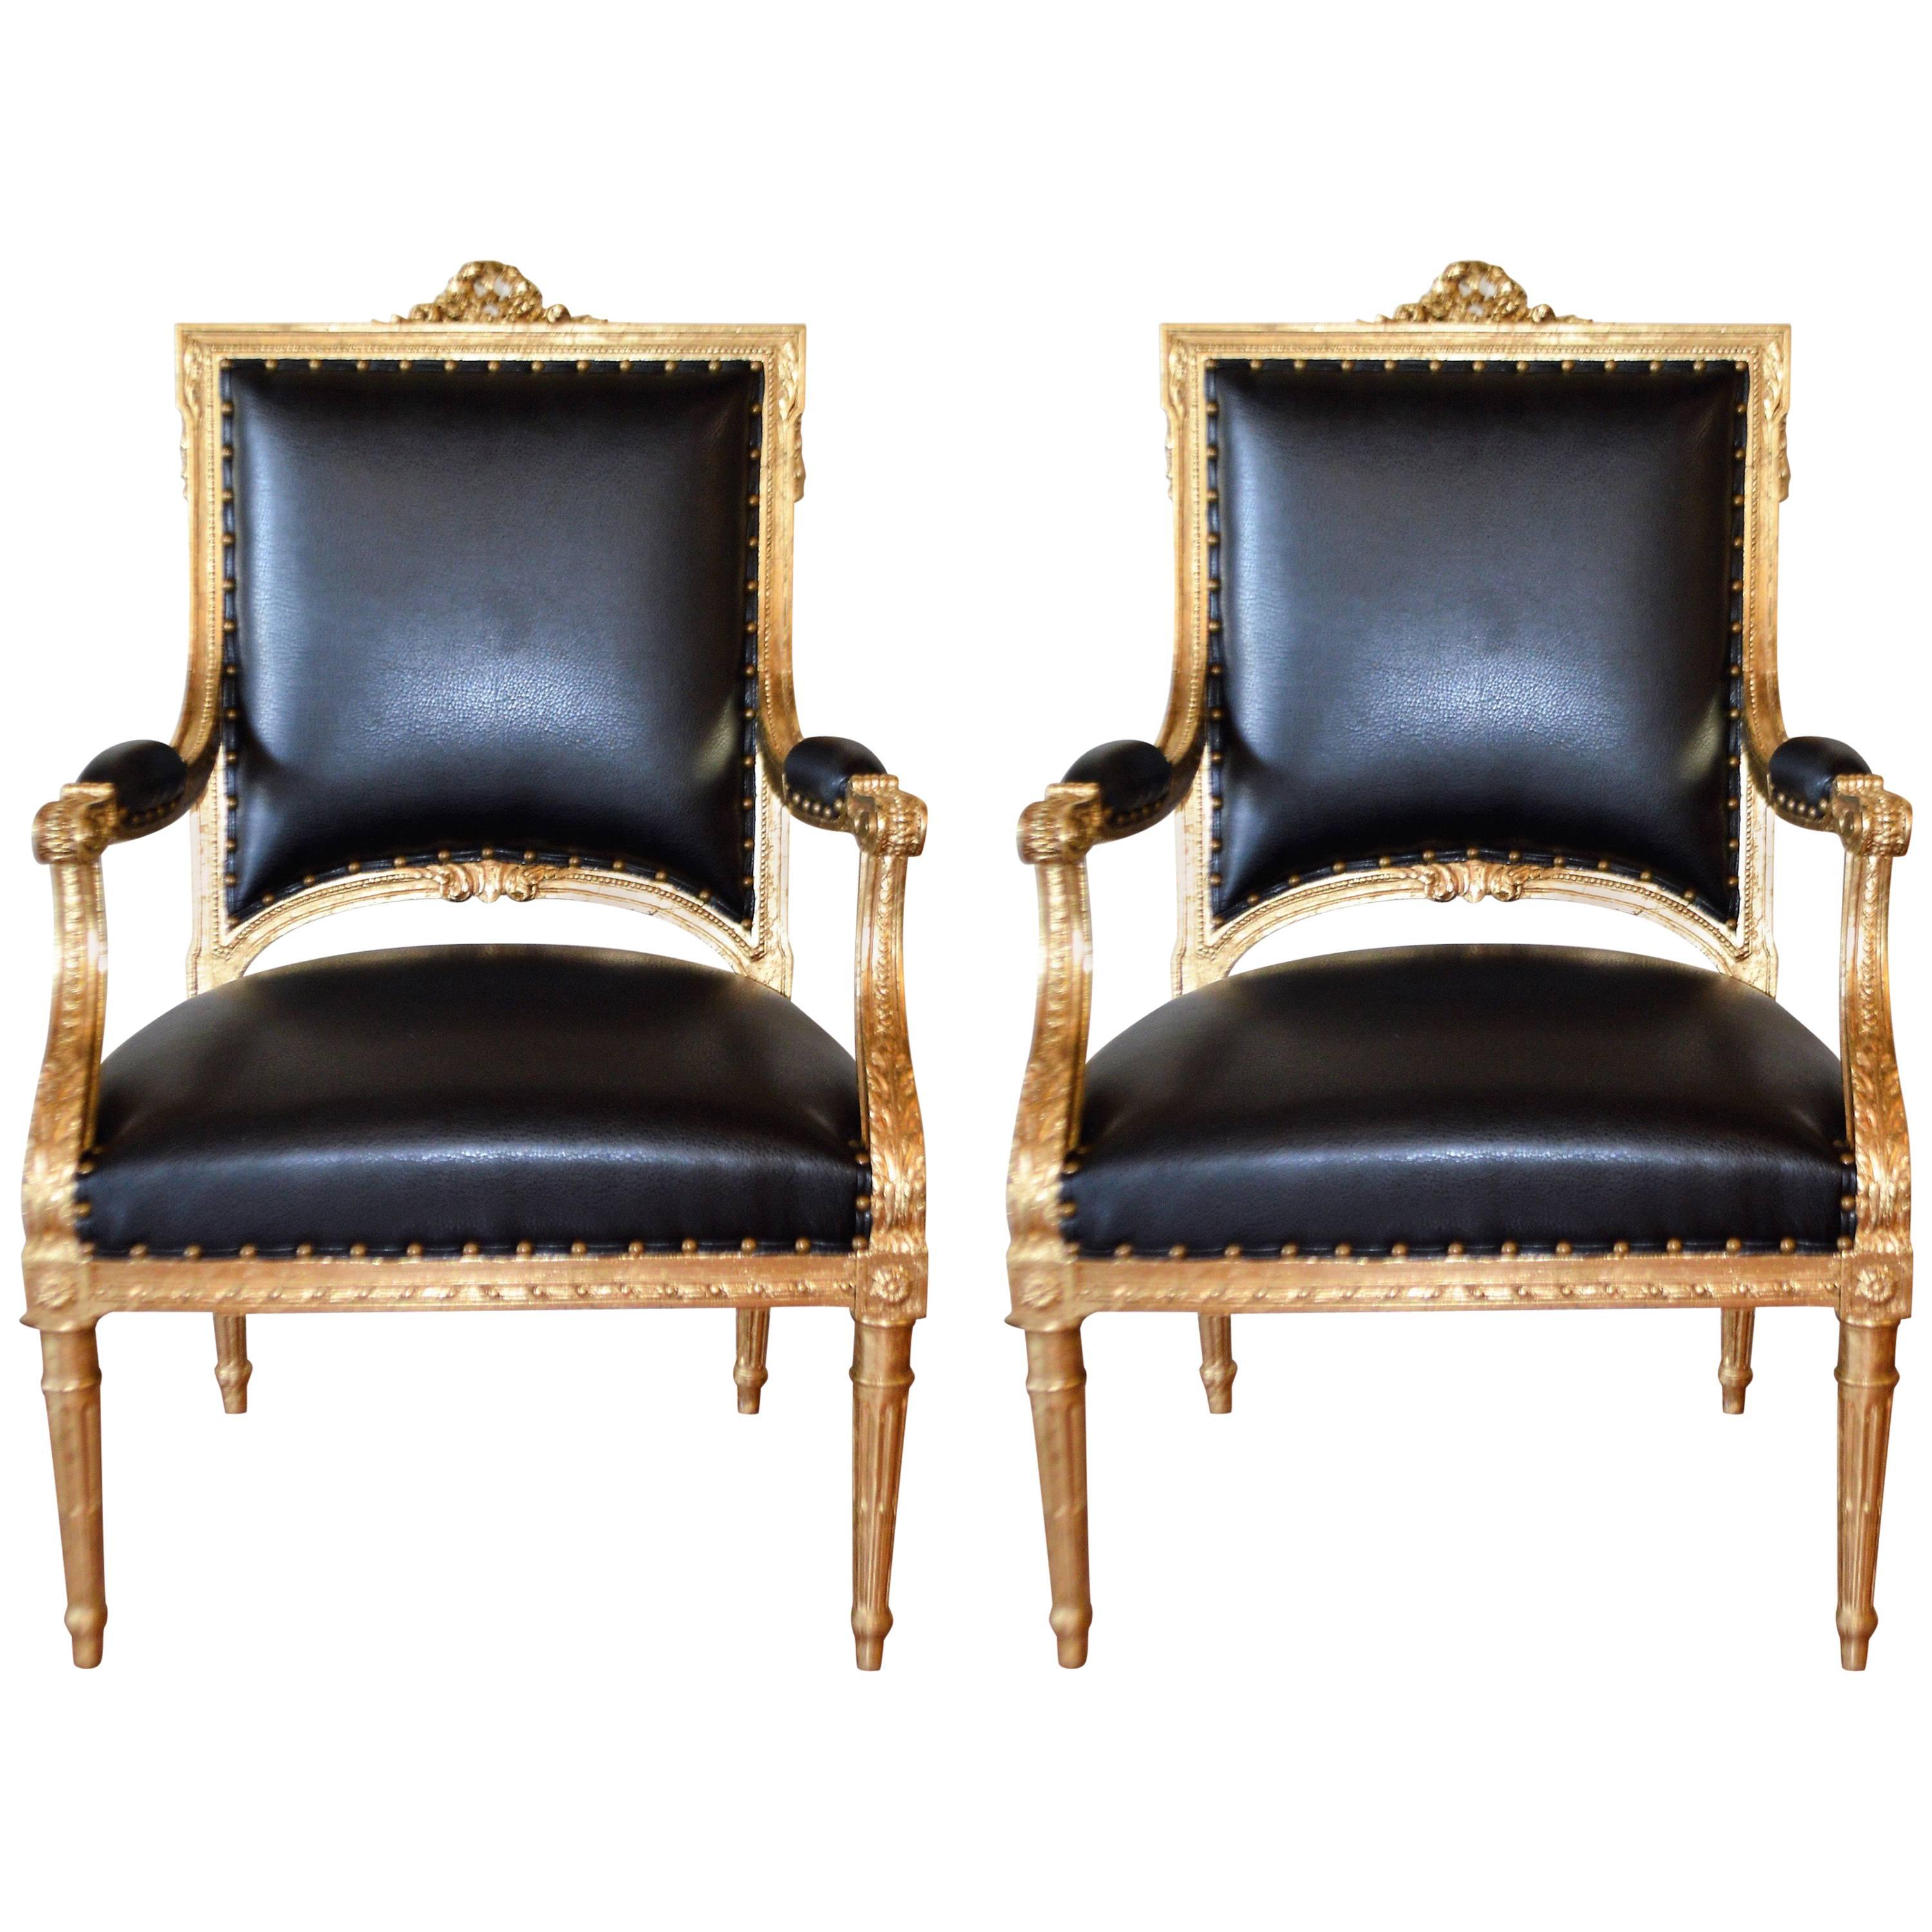 Pair of Louis XVI Style Gilded Armchairs Newly Upholstered in Black Faux Leather